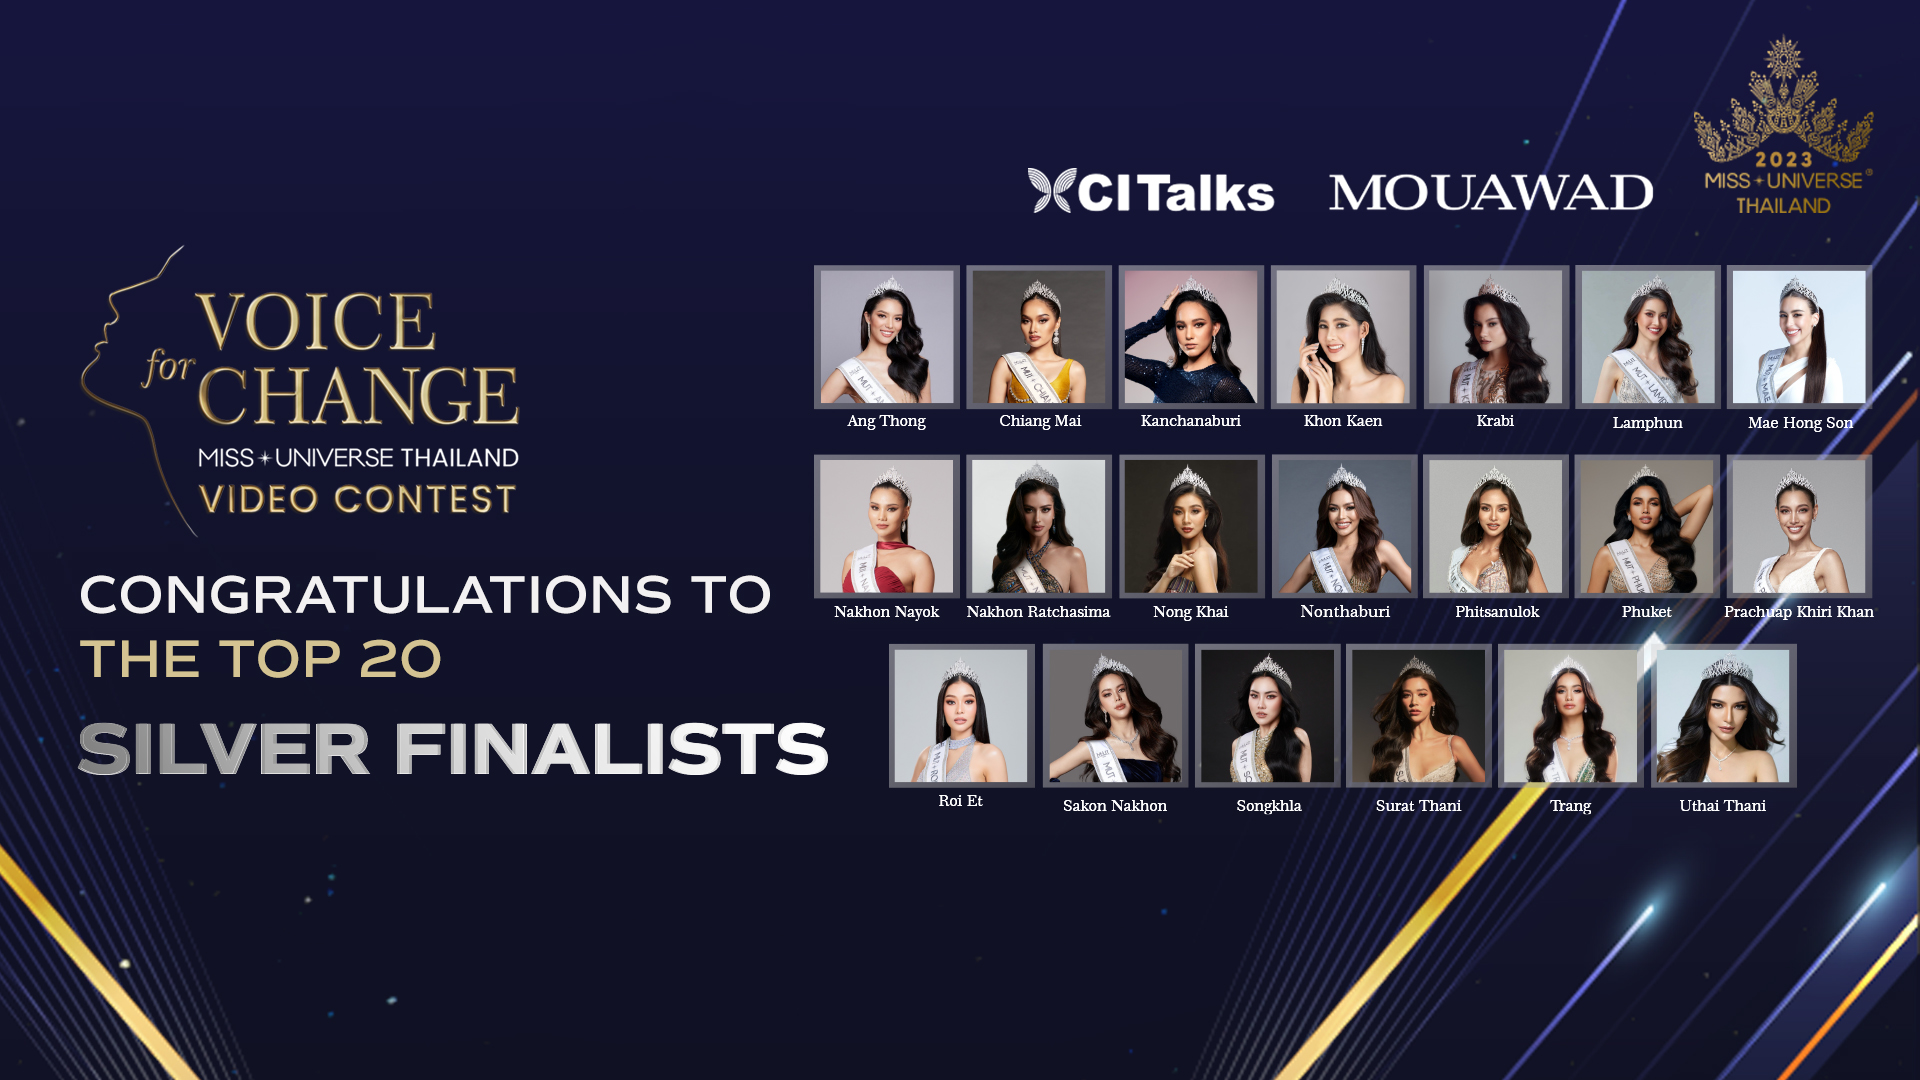 Mouawad & CI Talks "Voice for Change" Miss Universe Thailand 2023 Video Contest Silver Finalists.